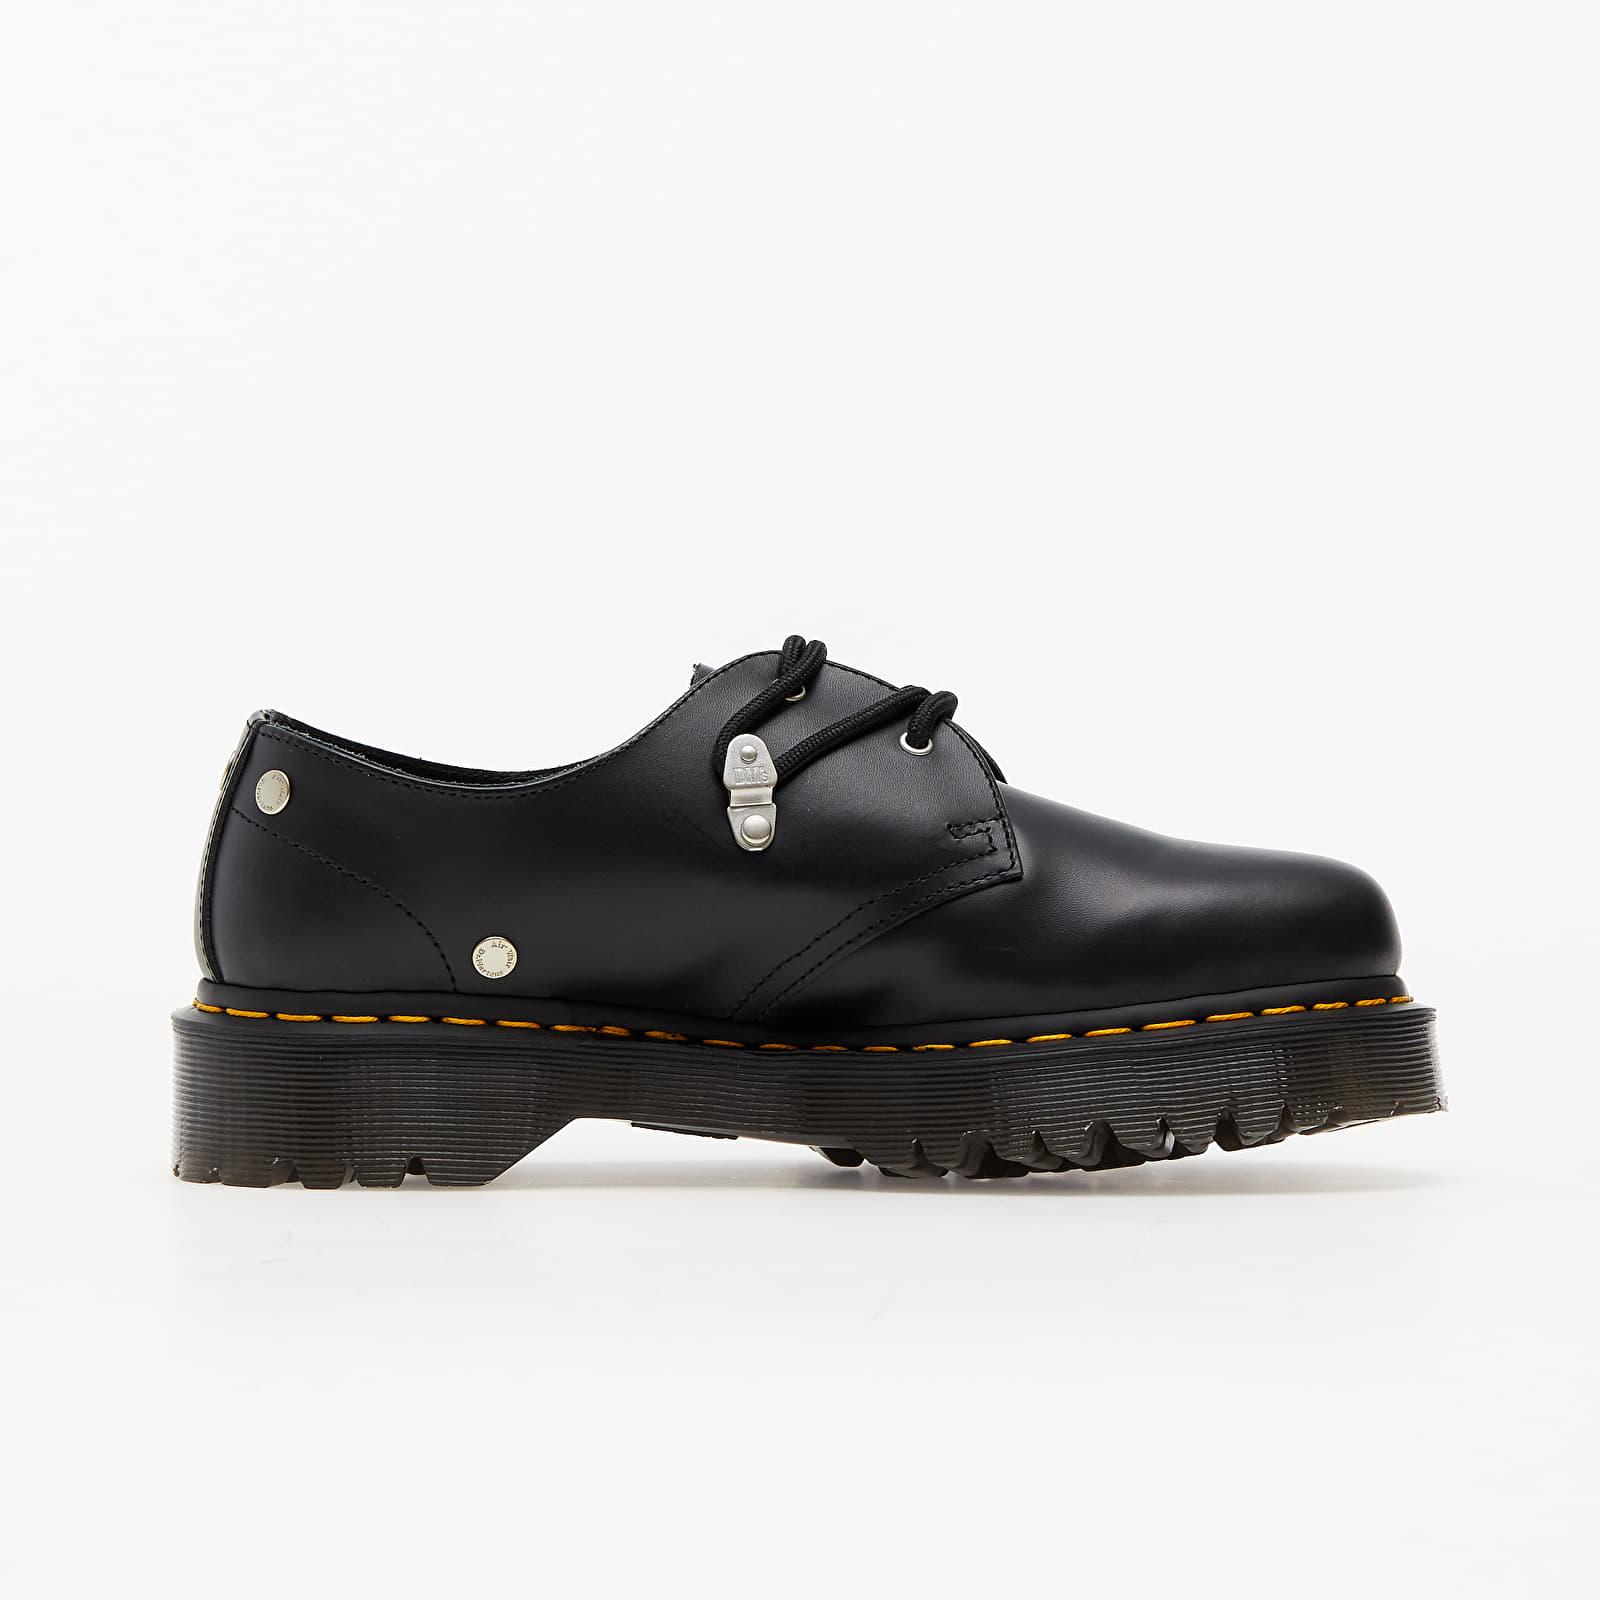 Dr. Martens 1461 Bex Stud Black Fine Haircell | Lyst